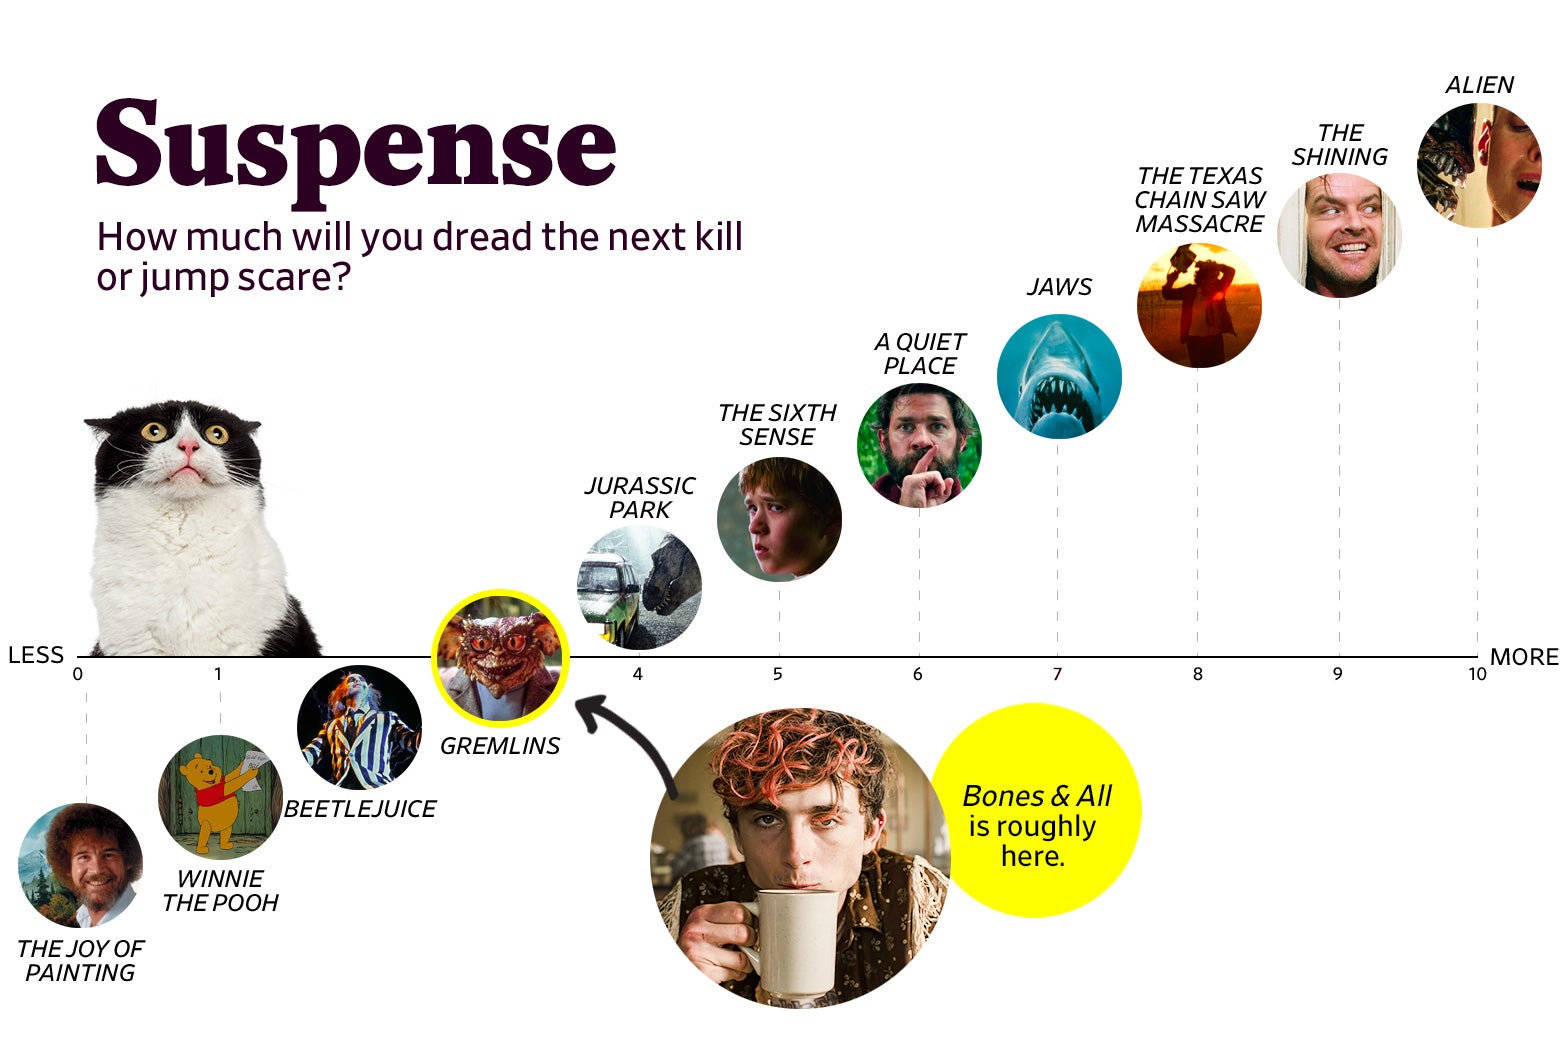 A chart titled “Suspense: How much will you dread the next kill or jump scare?” shows that Bones and All ranks a 3 in suspense, roughly the same as Gremlins. The scale ranges from The Joy of Painting (0) to Alien (10).